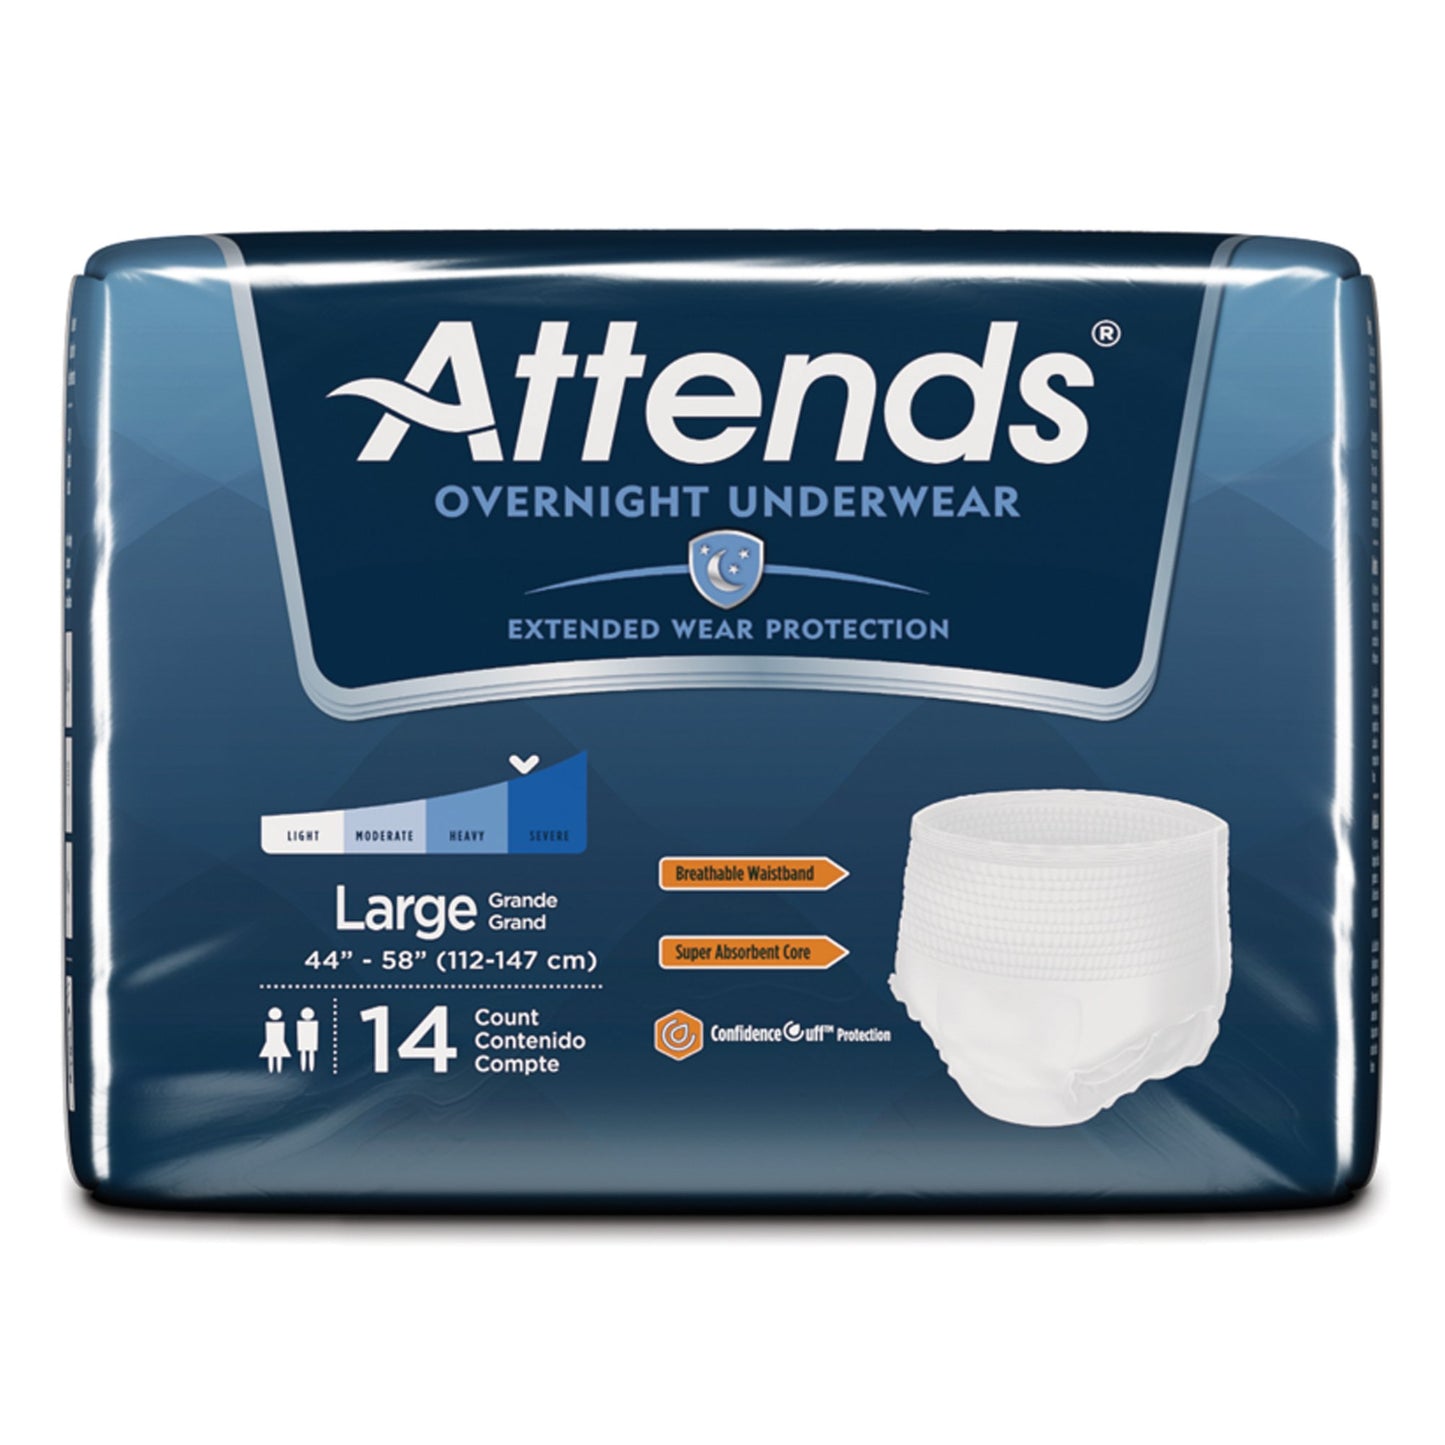 Attends® Overnight Underwear with Extended Wear Protection, Large, 14 ct